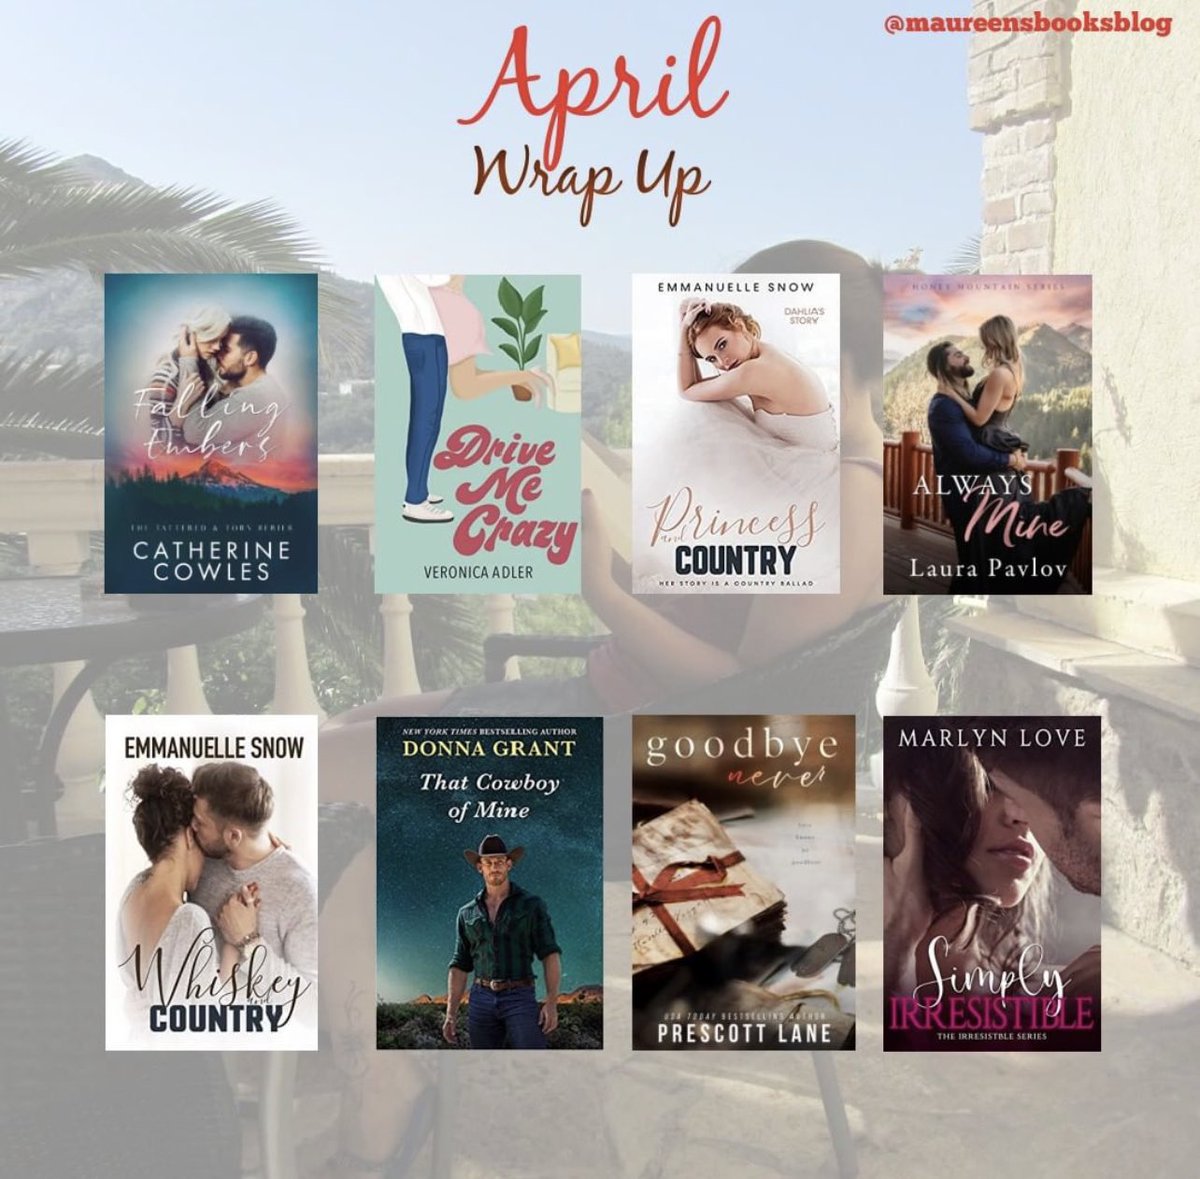 ✨ April Wrap Up ✨

Happy May! I feel like I've just written my March Wrap Up post.. but here we are again wrapping April up. It's been a pretty good reading month for me. I read 8 books. And they've been great.

#AprilWrapUp #BookBlogger #WrapUp  #Blogger #MonthlyWrapUp